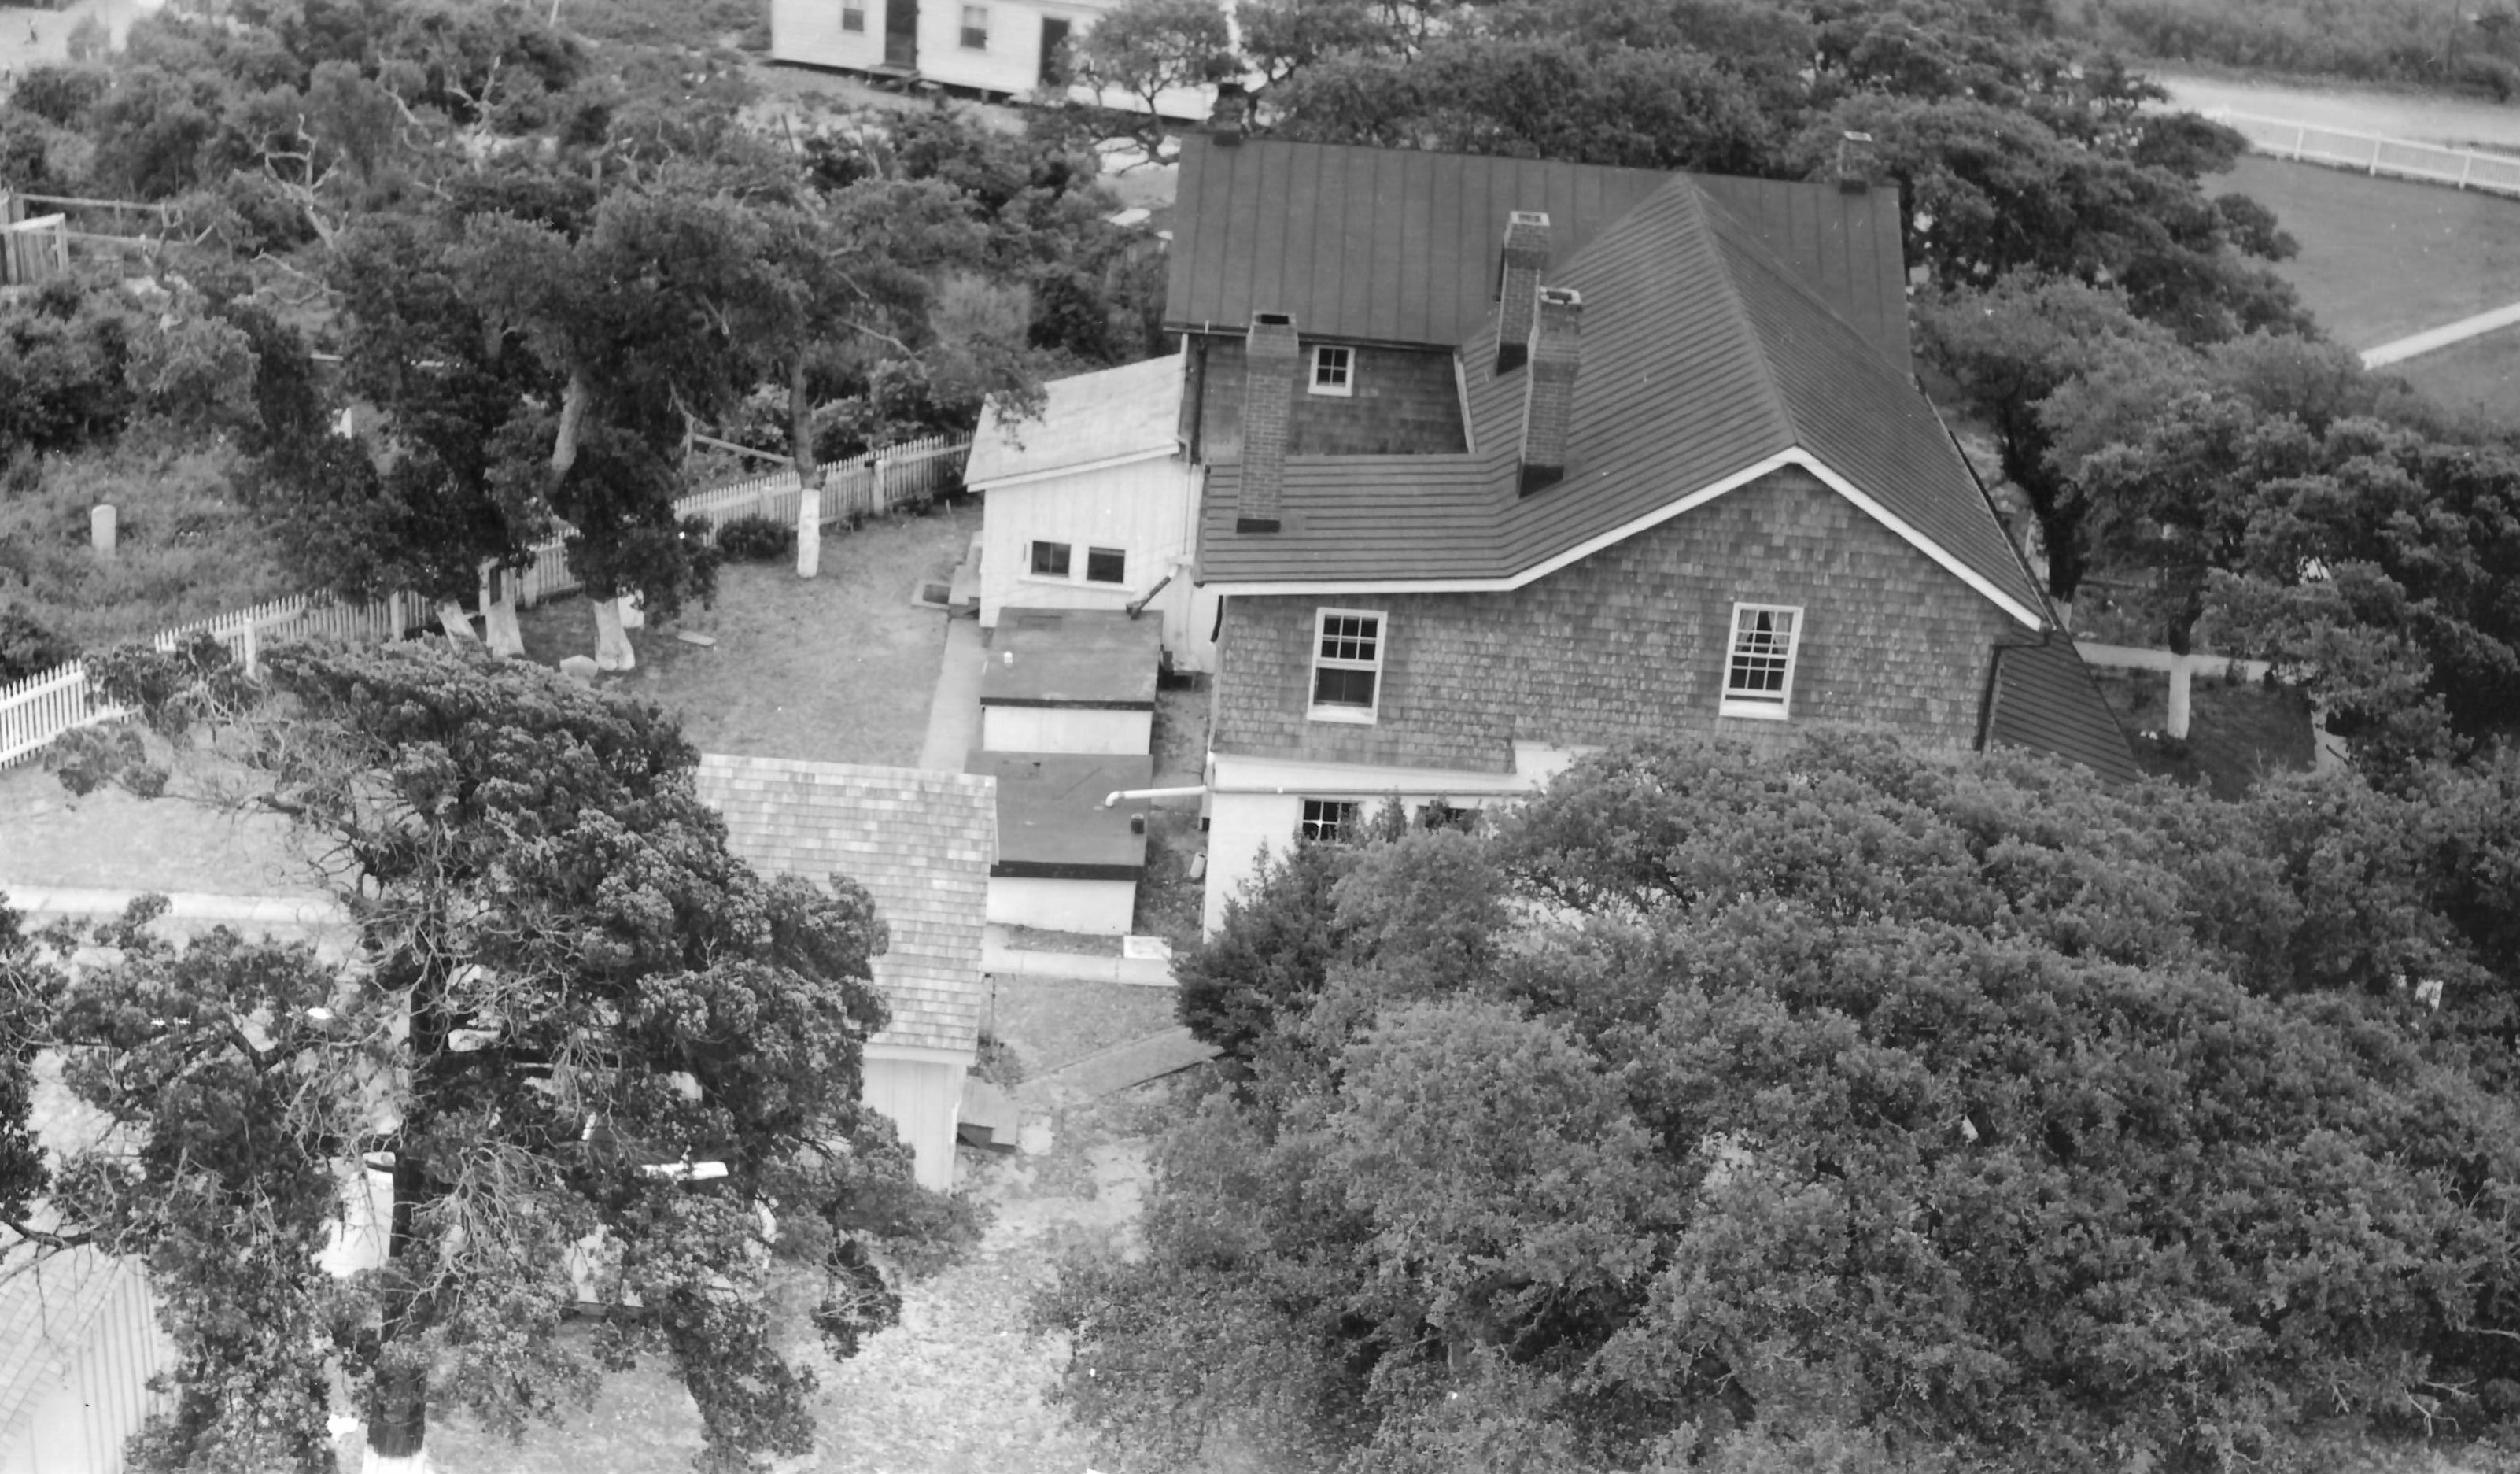 View from Ocracoke Lighthouse on May 29, 1941.